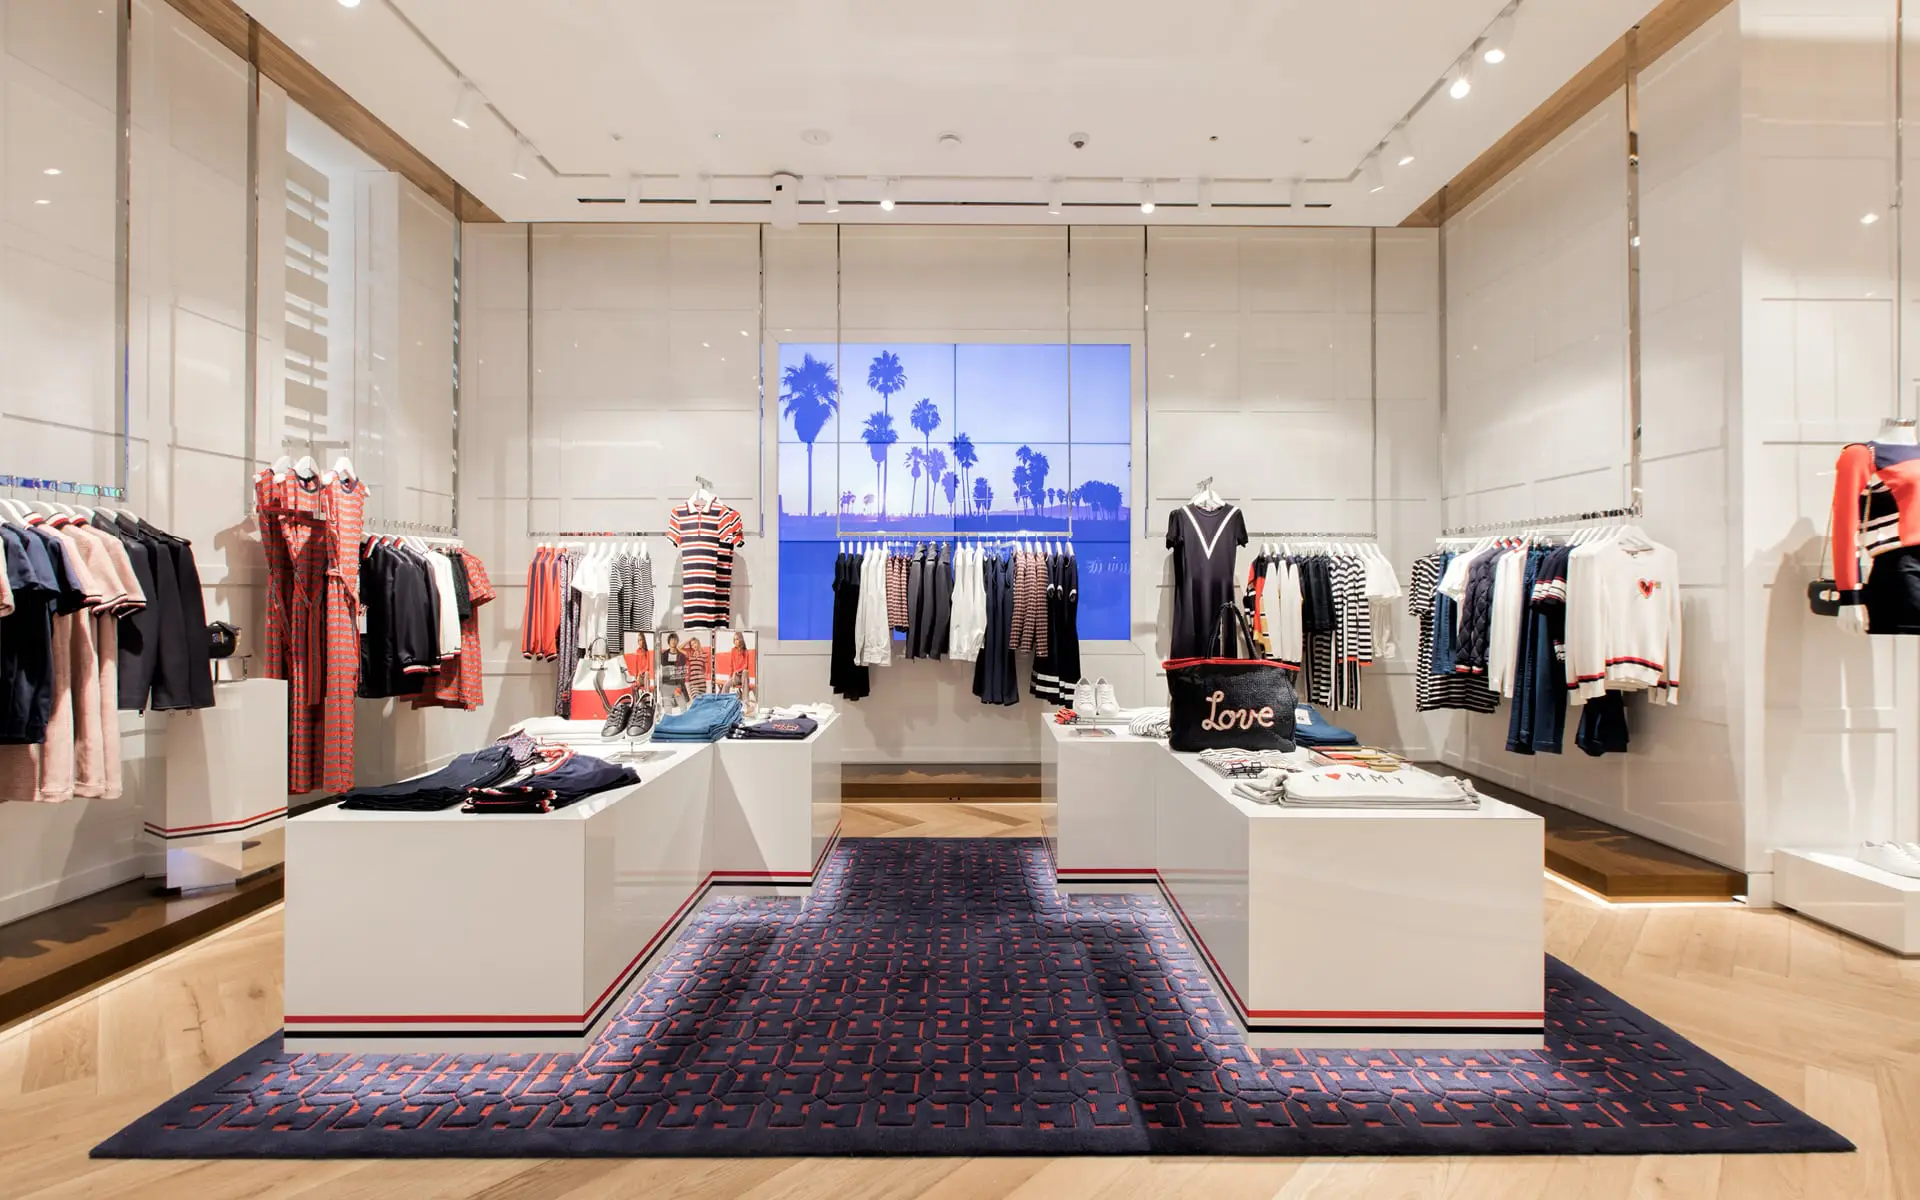 </p>
<p><strong>Tommy Hilfiger Flagship Store</strong><br />London</p>
<p>